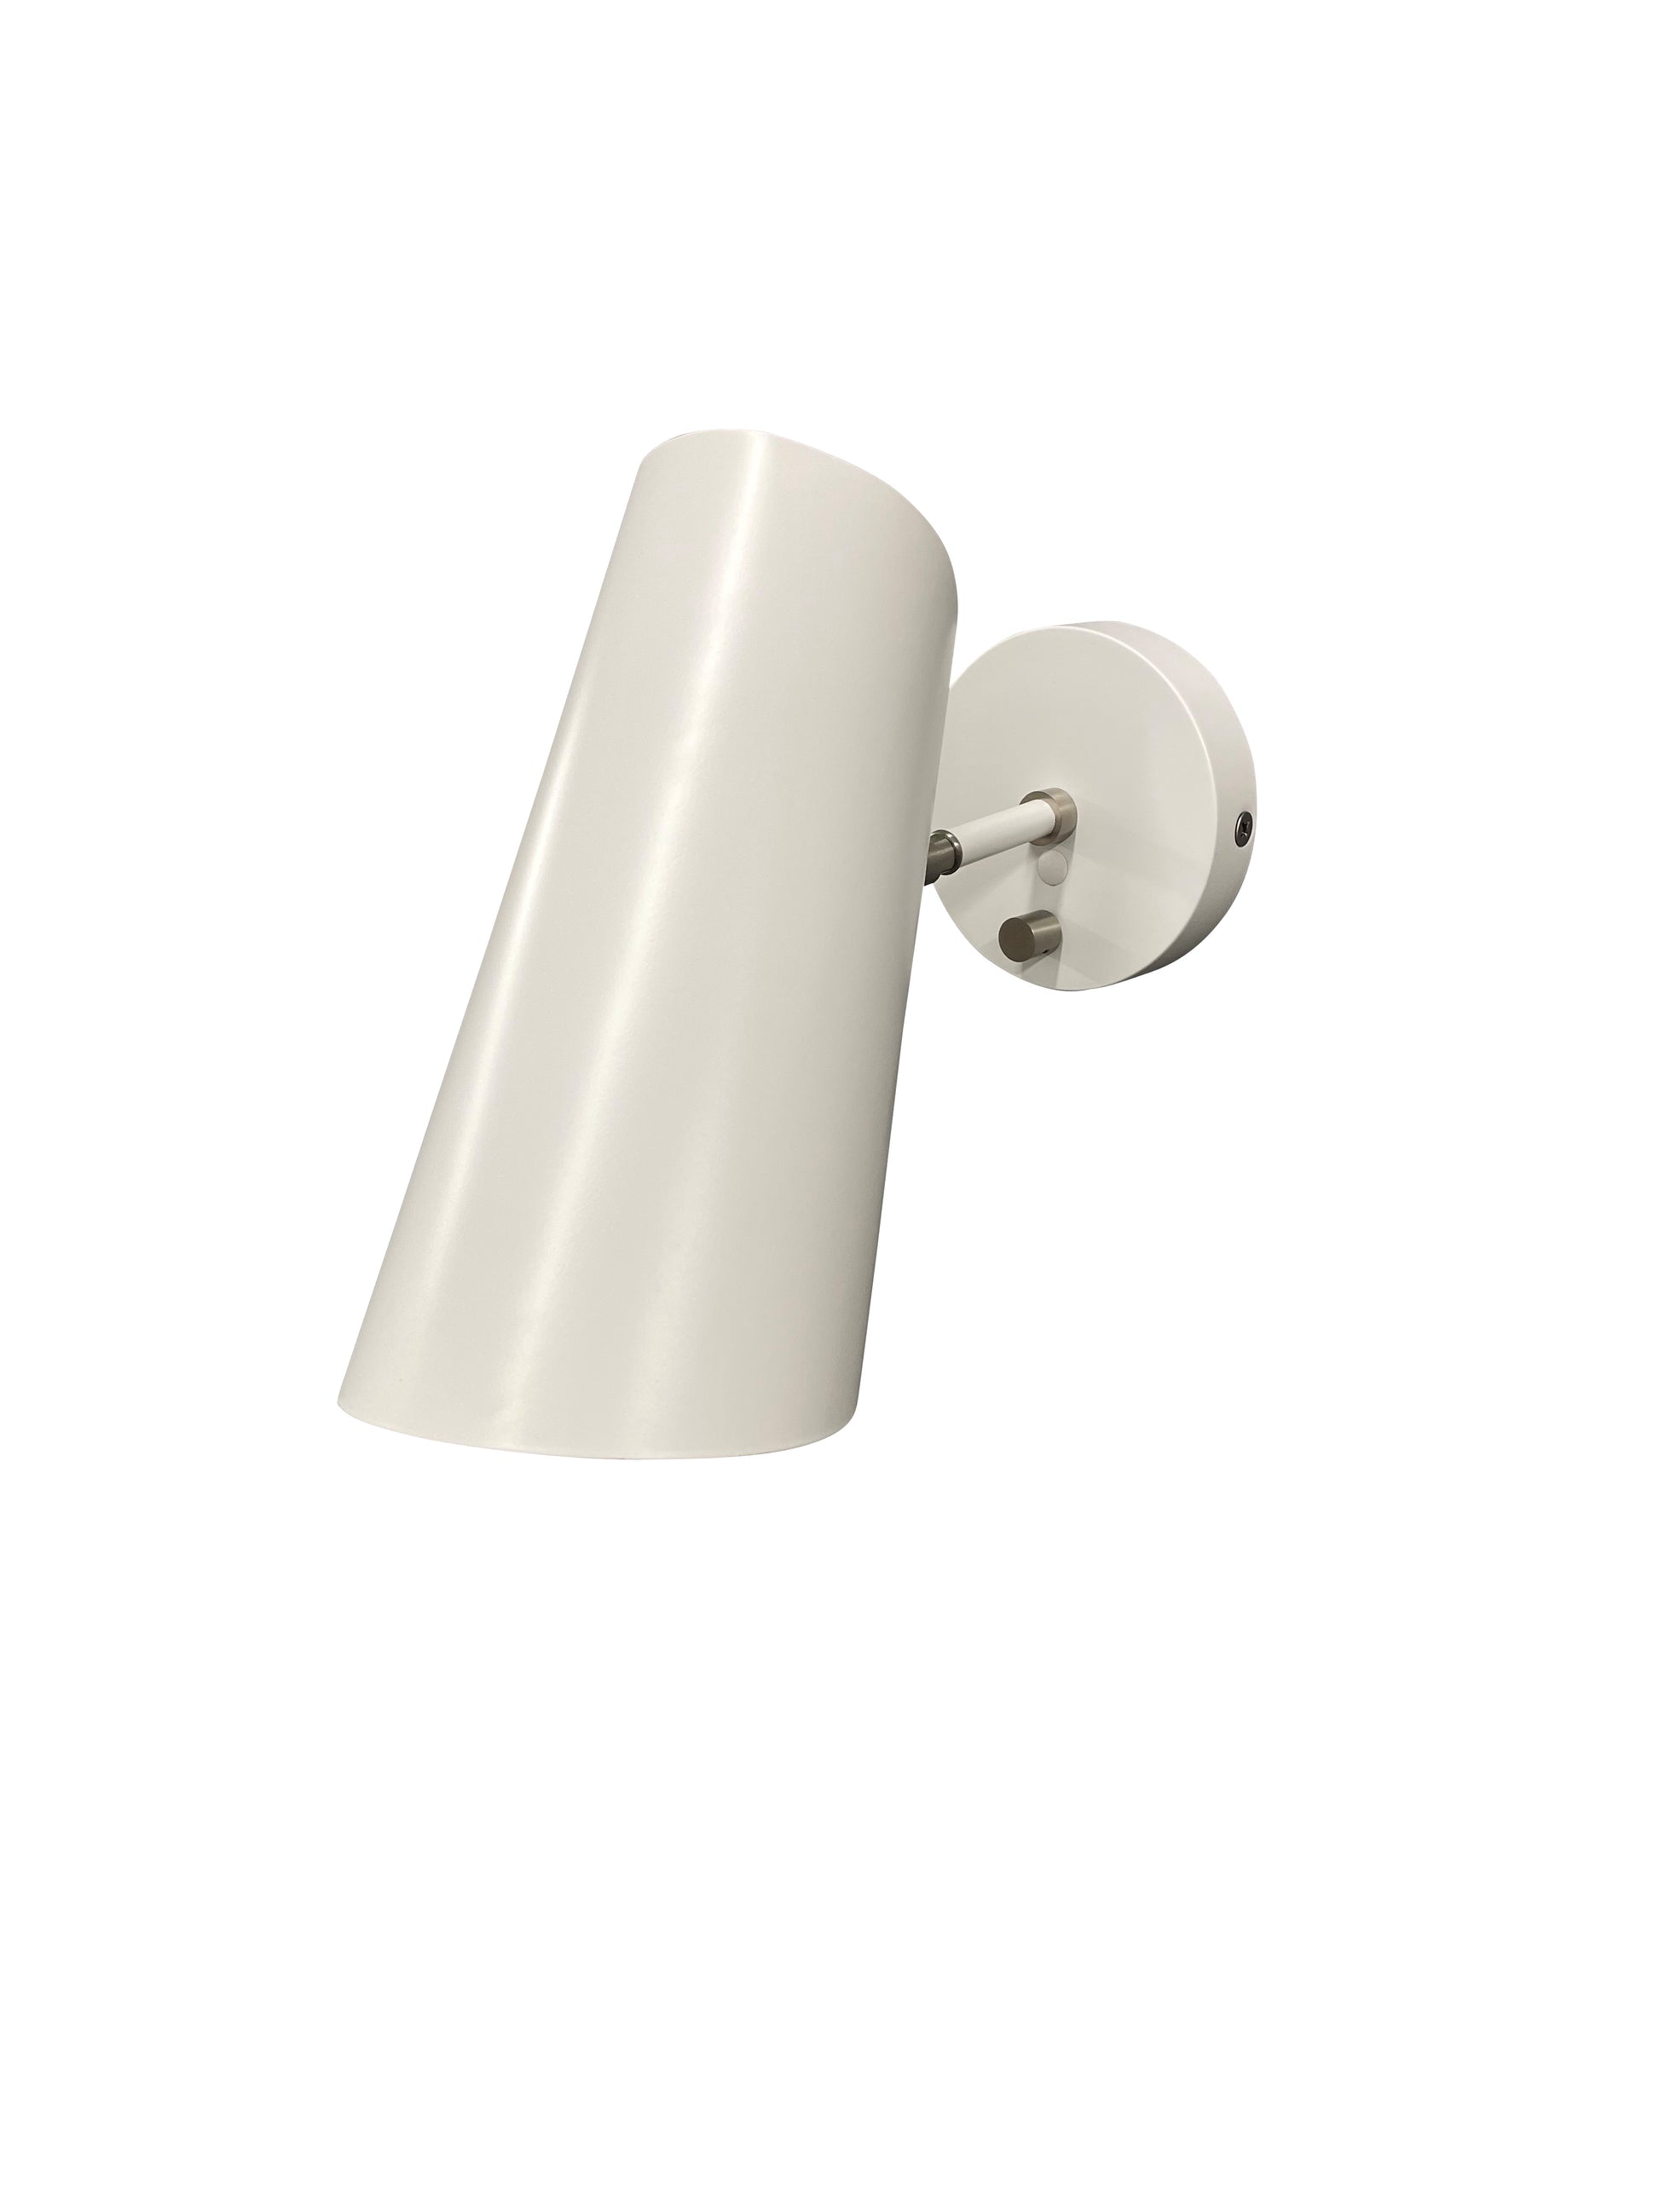 House of Troy Logan White Satin Nickel Wall Sconce Rolled L325-WTSN